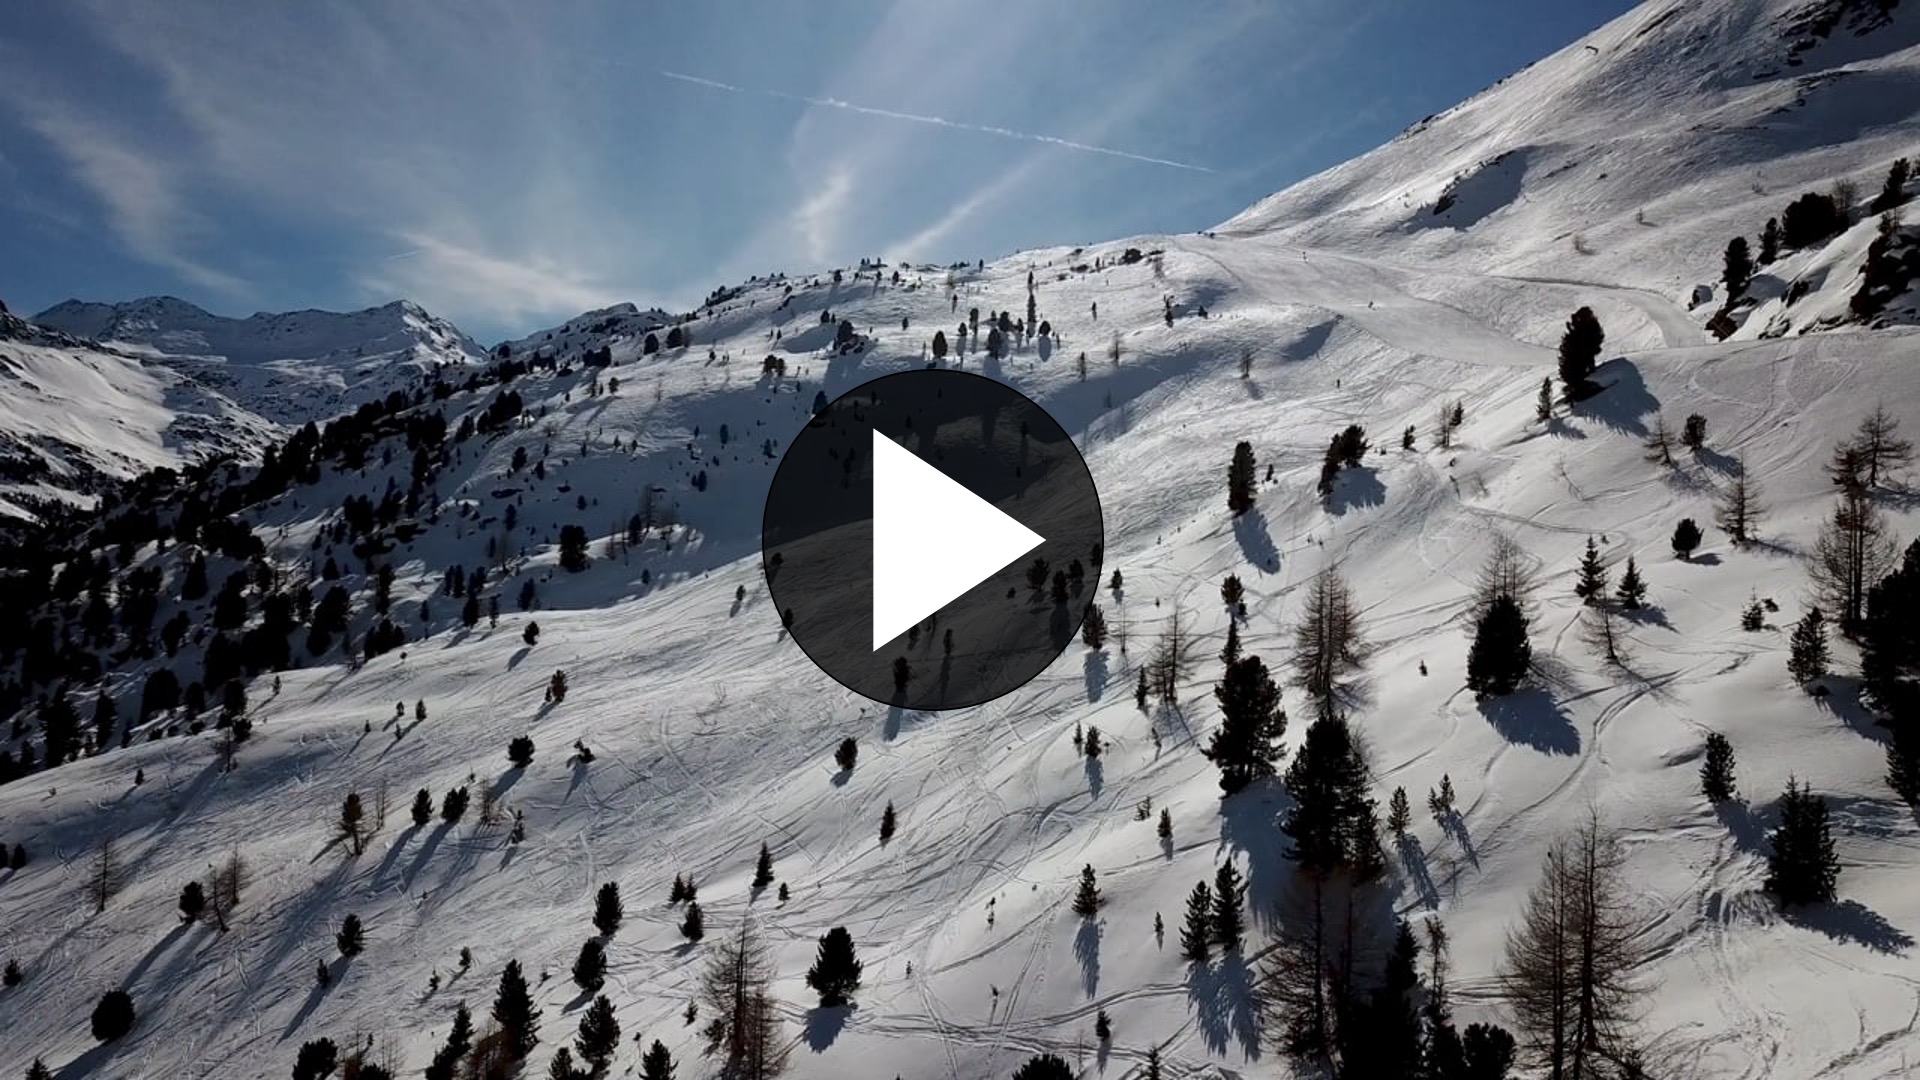 Skiing trip film - click to play